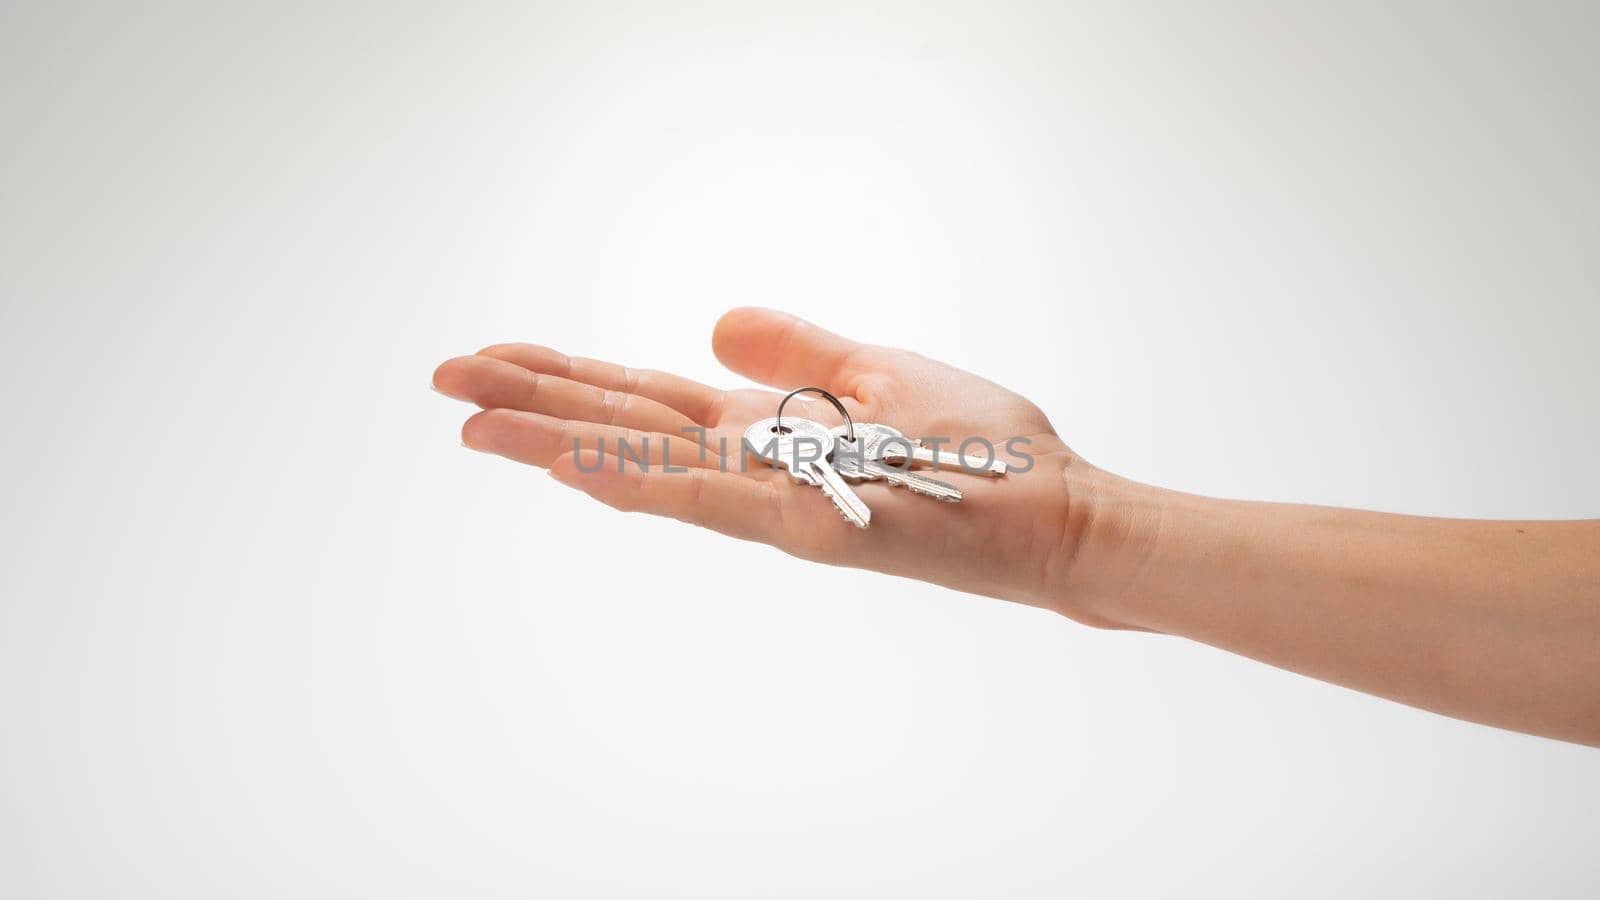 A bunch of keys lies on a woman's palm on a white background by voktybre